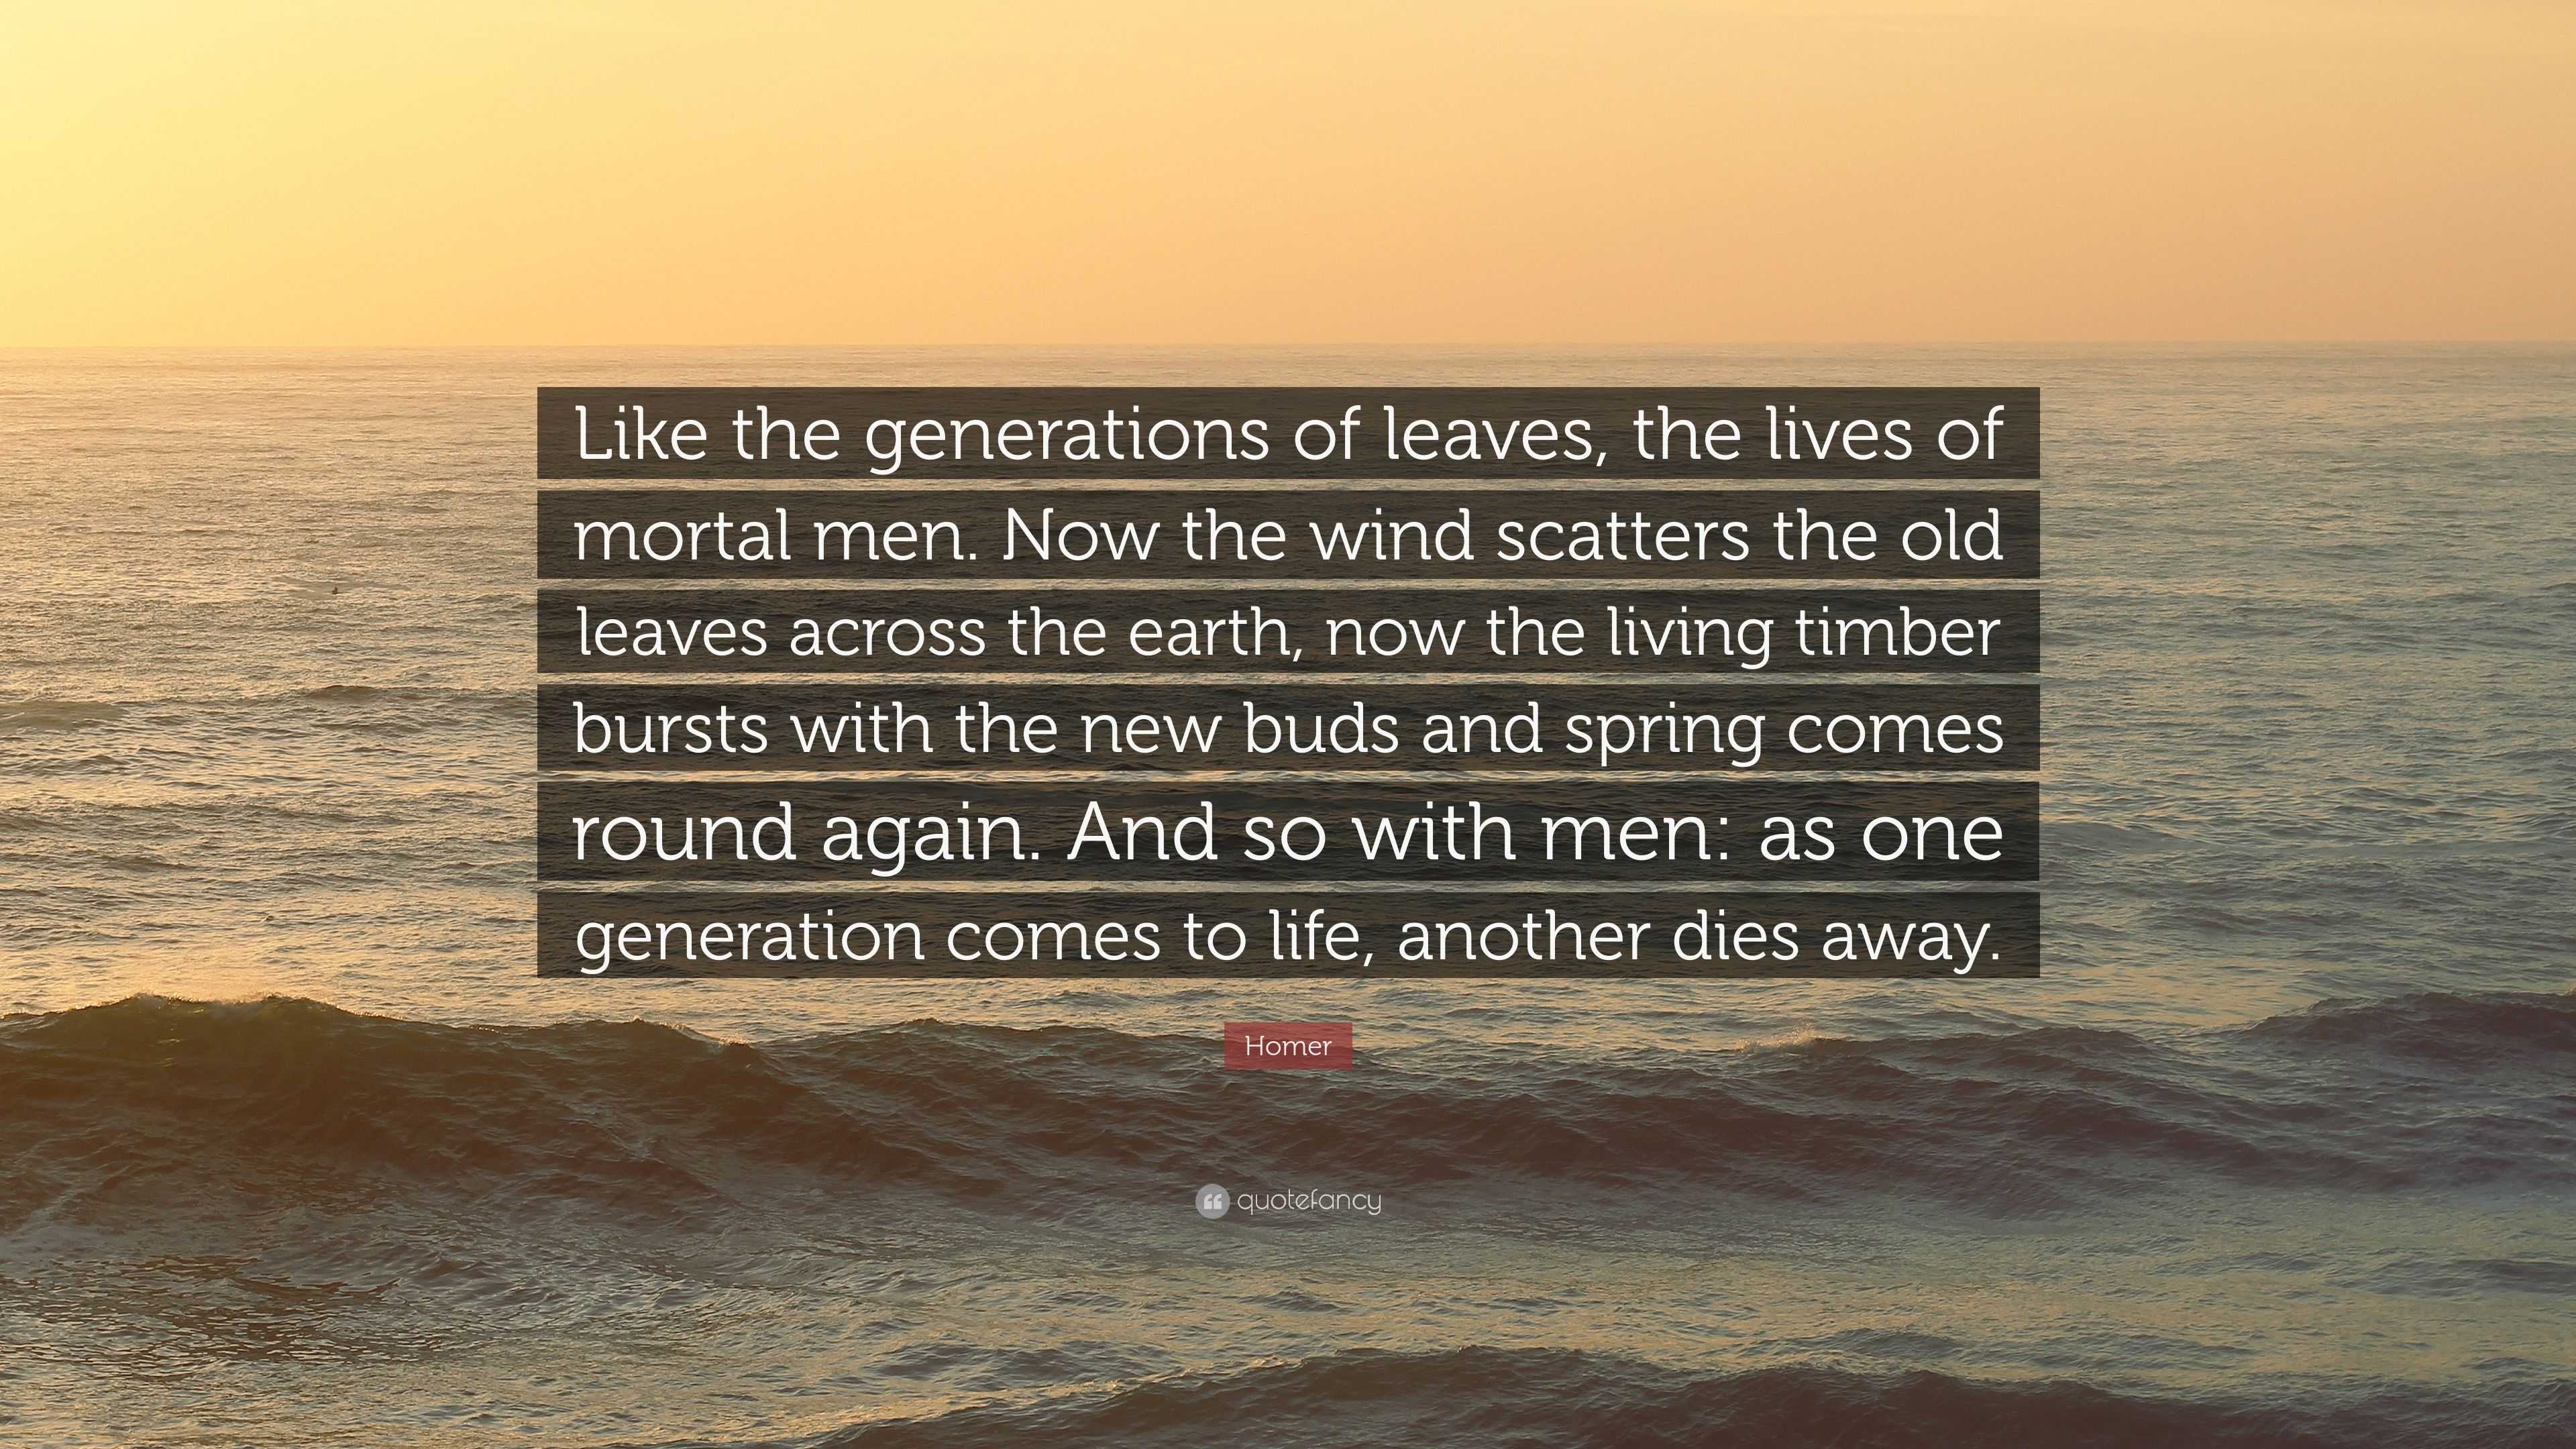 Homer Quote: “Like the generations of leaves, the lives of mortal men. Now  the wind scatters the old leaves across the earth, now the ...”